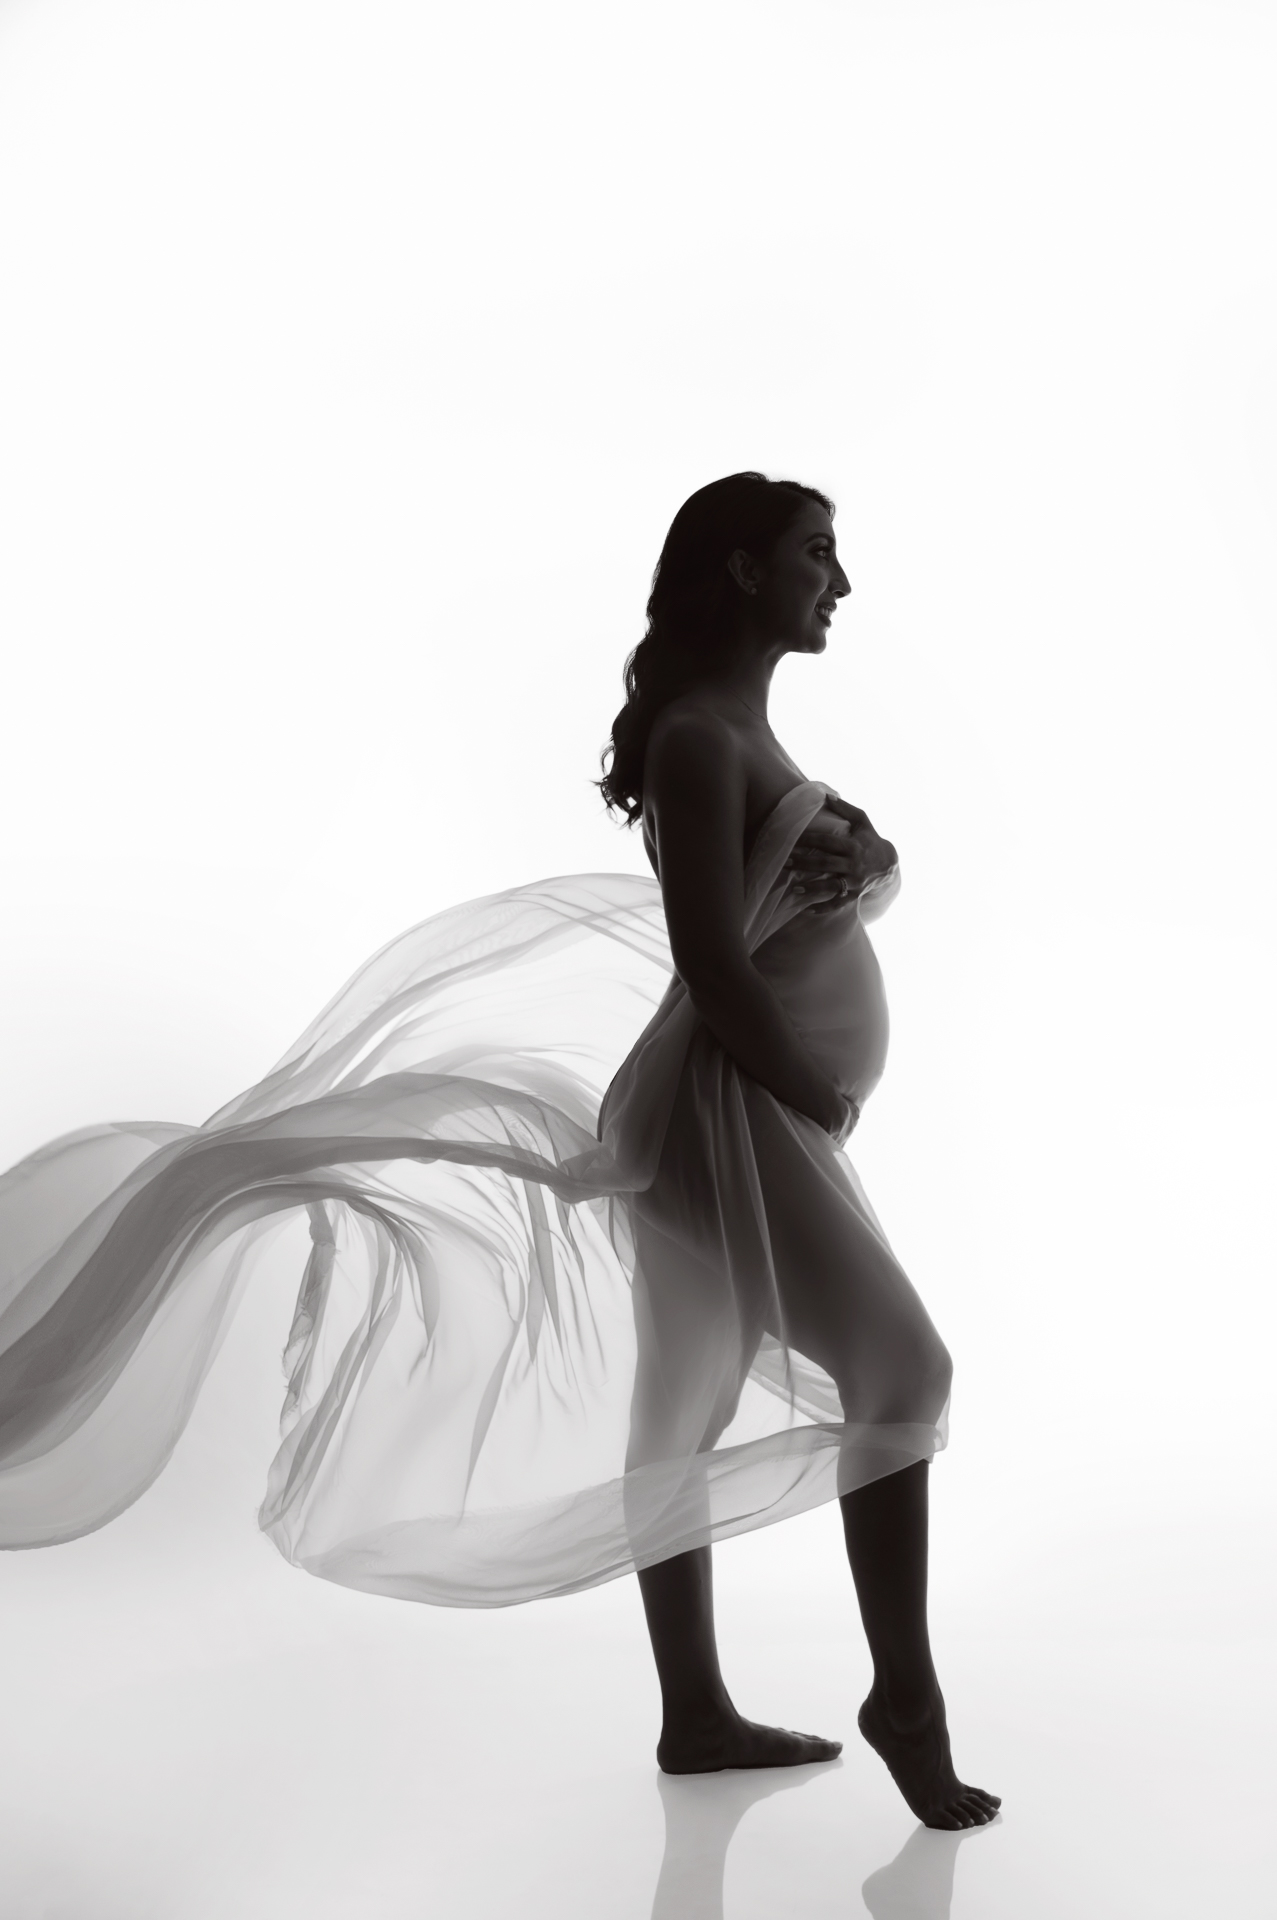 pregnant woman staying pose silhouette, white fabric covering, white backdrop